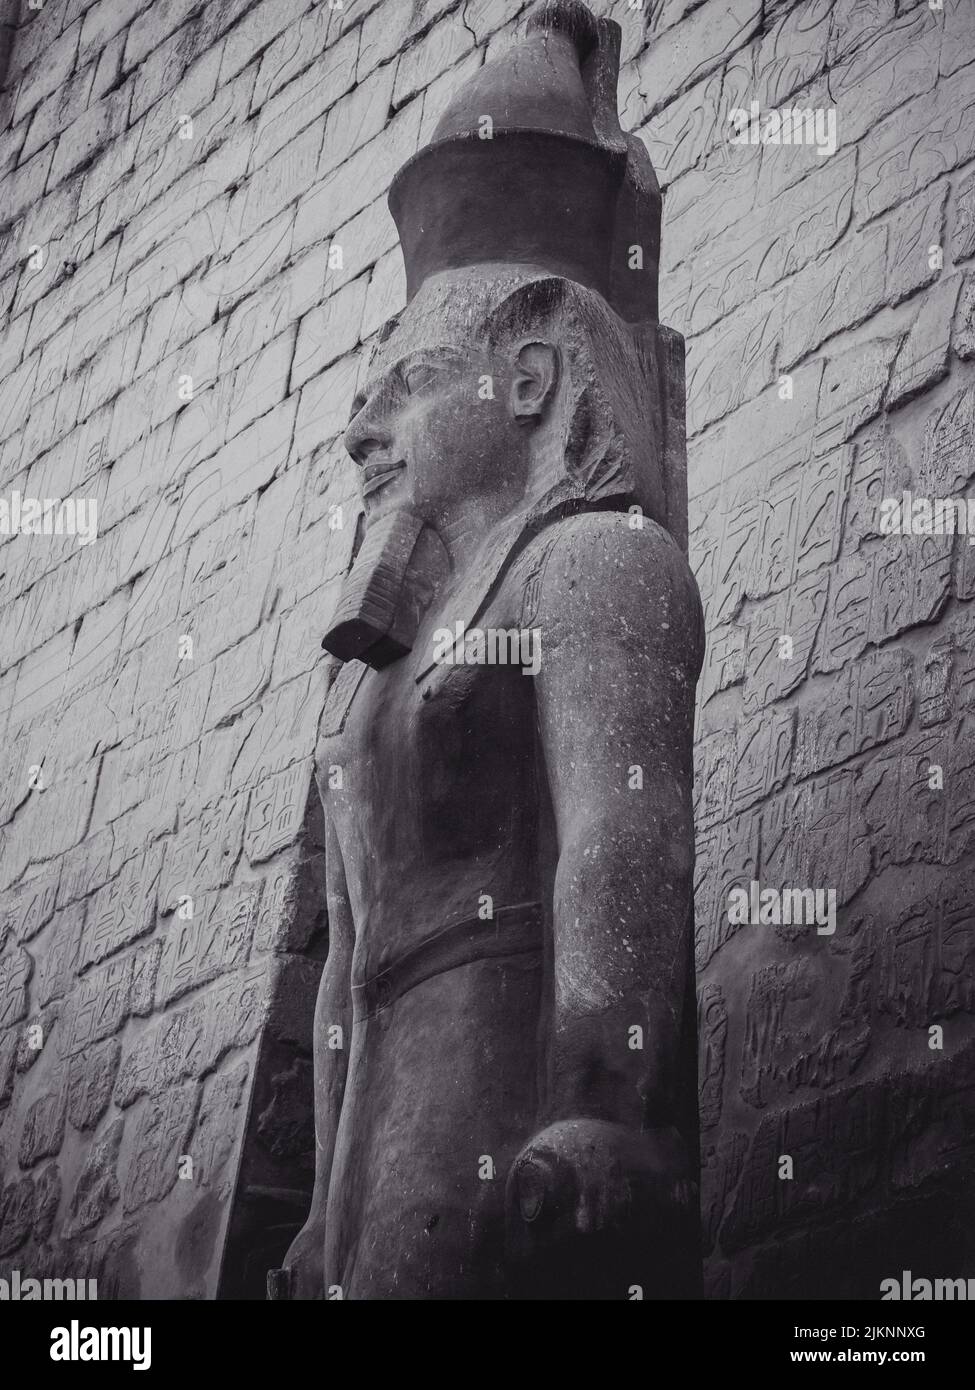 A low angle view of the statue of Ramesses II in Egypt Stock Photo